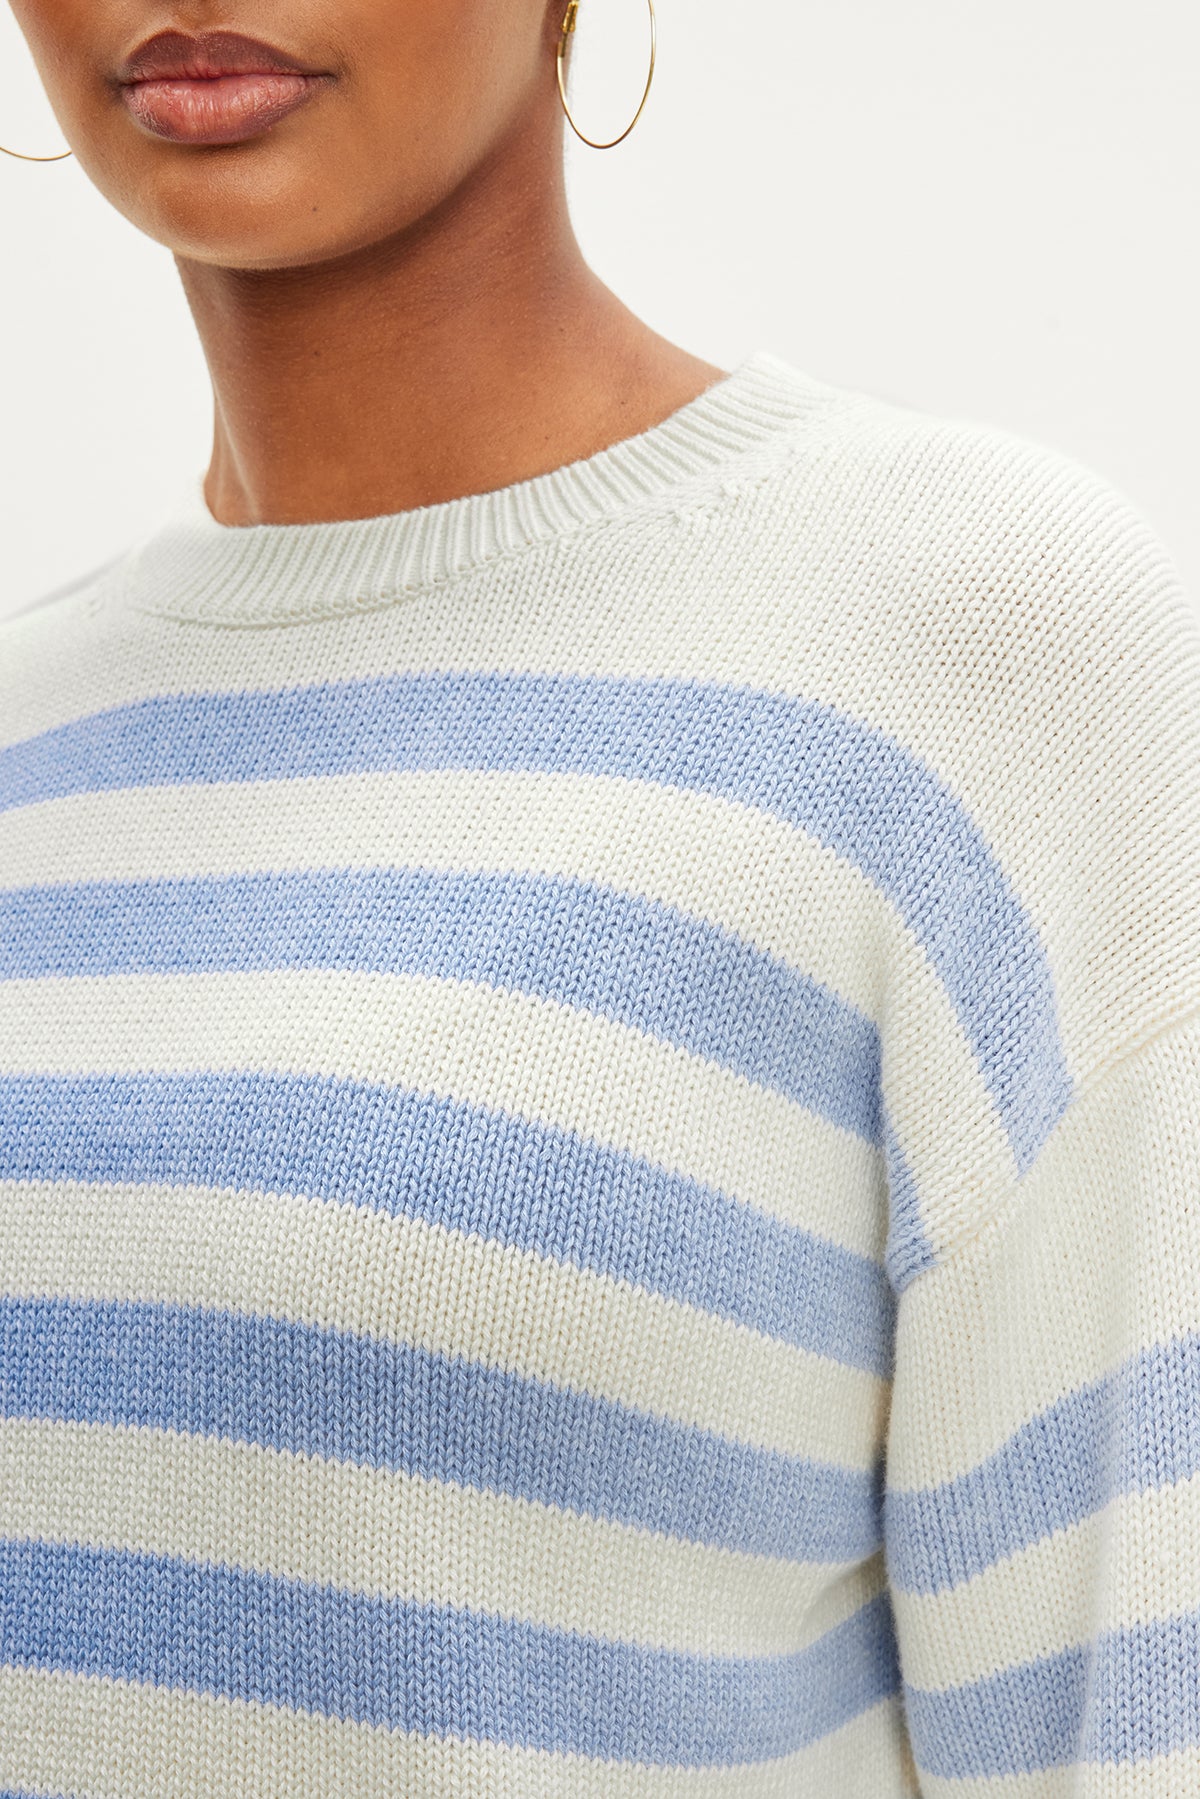 A woman wearing a modern blue and white striped LEX STRIPED CREW NECK SWEATER by Velvet by Graham & Spencer.-35967621693633